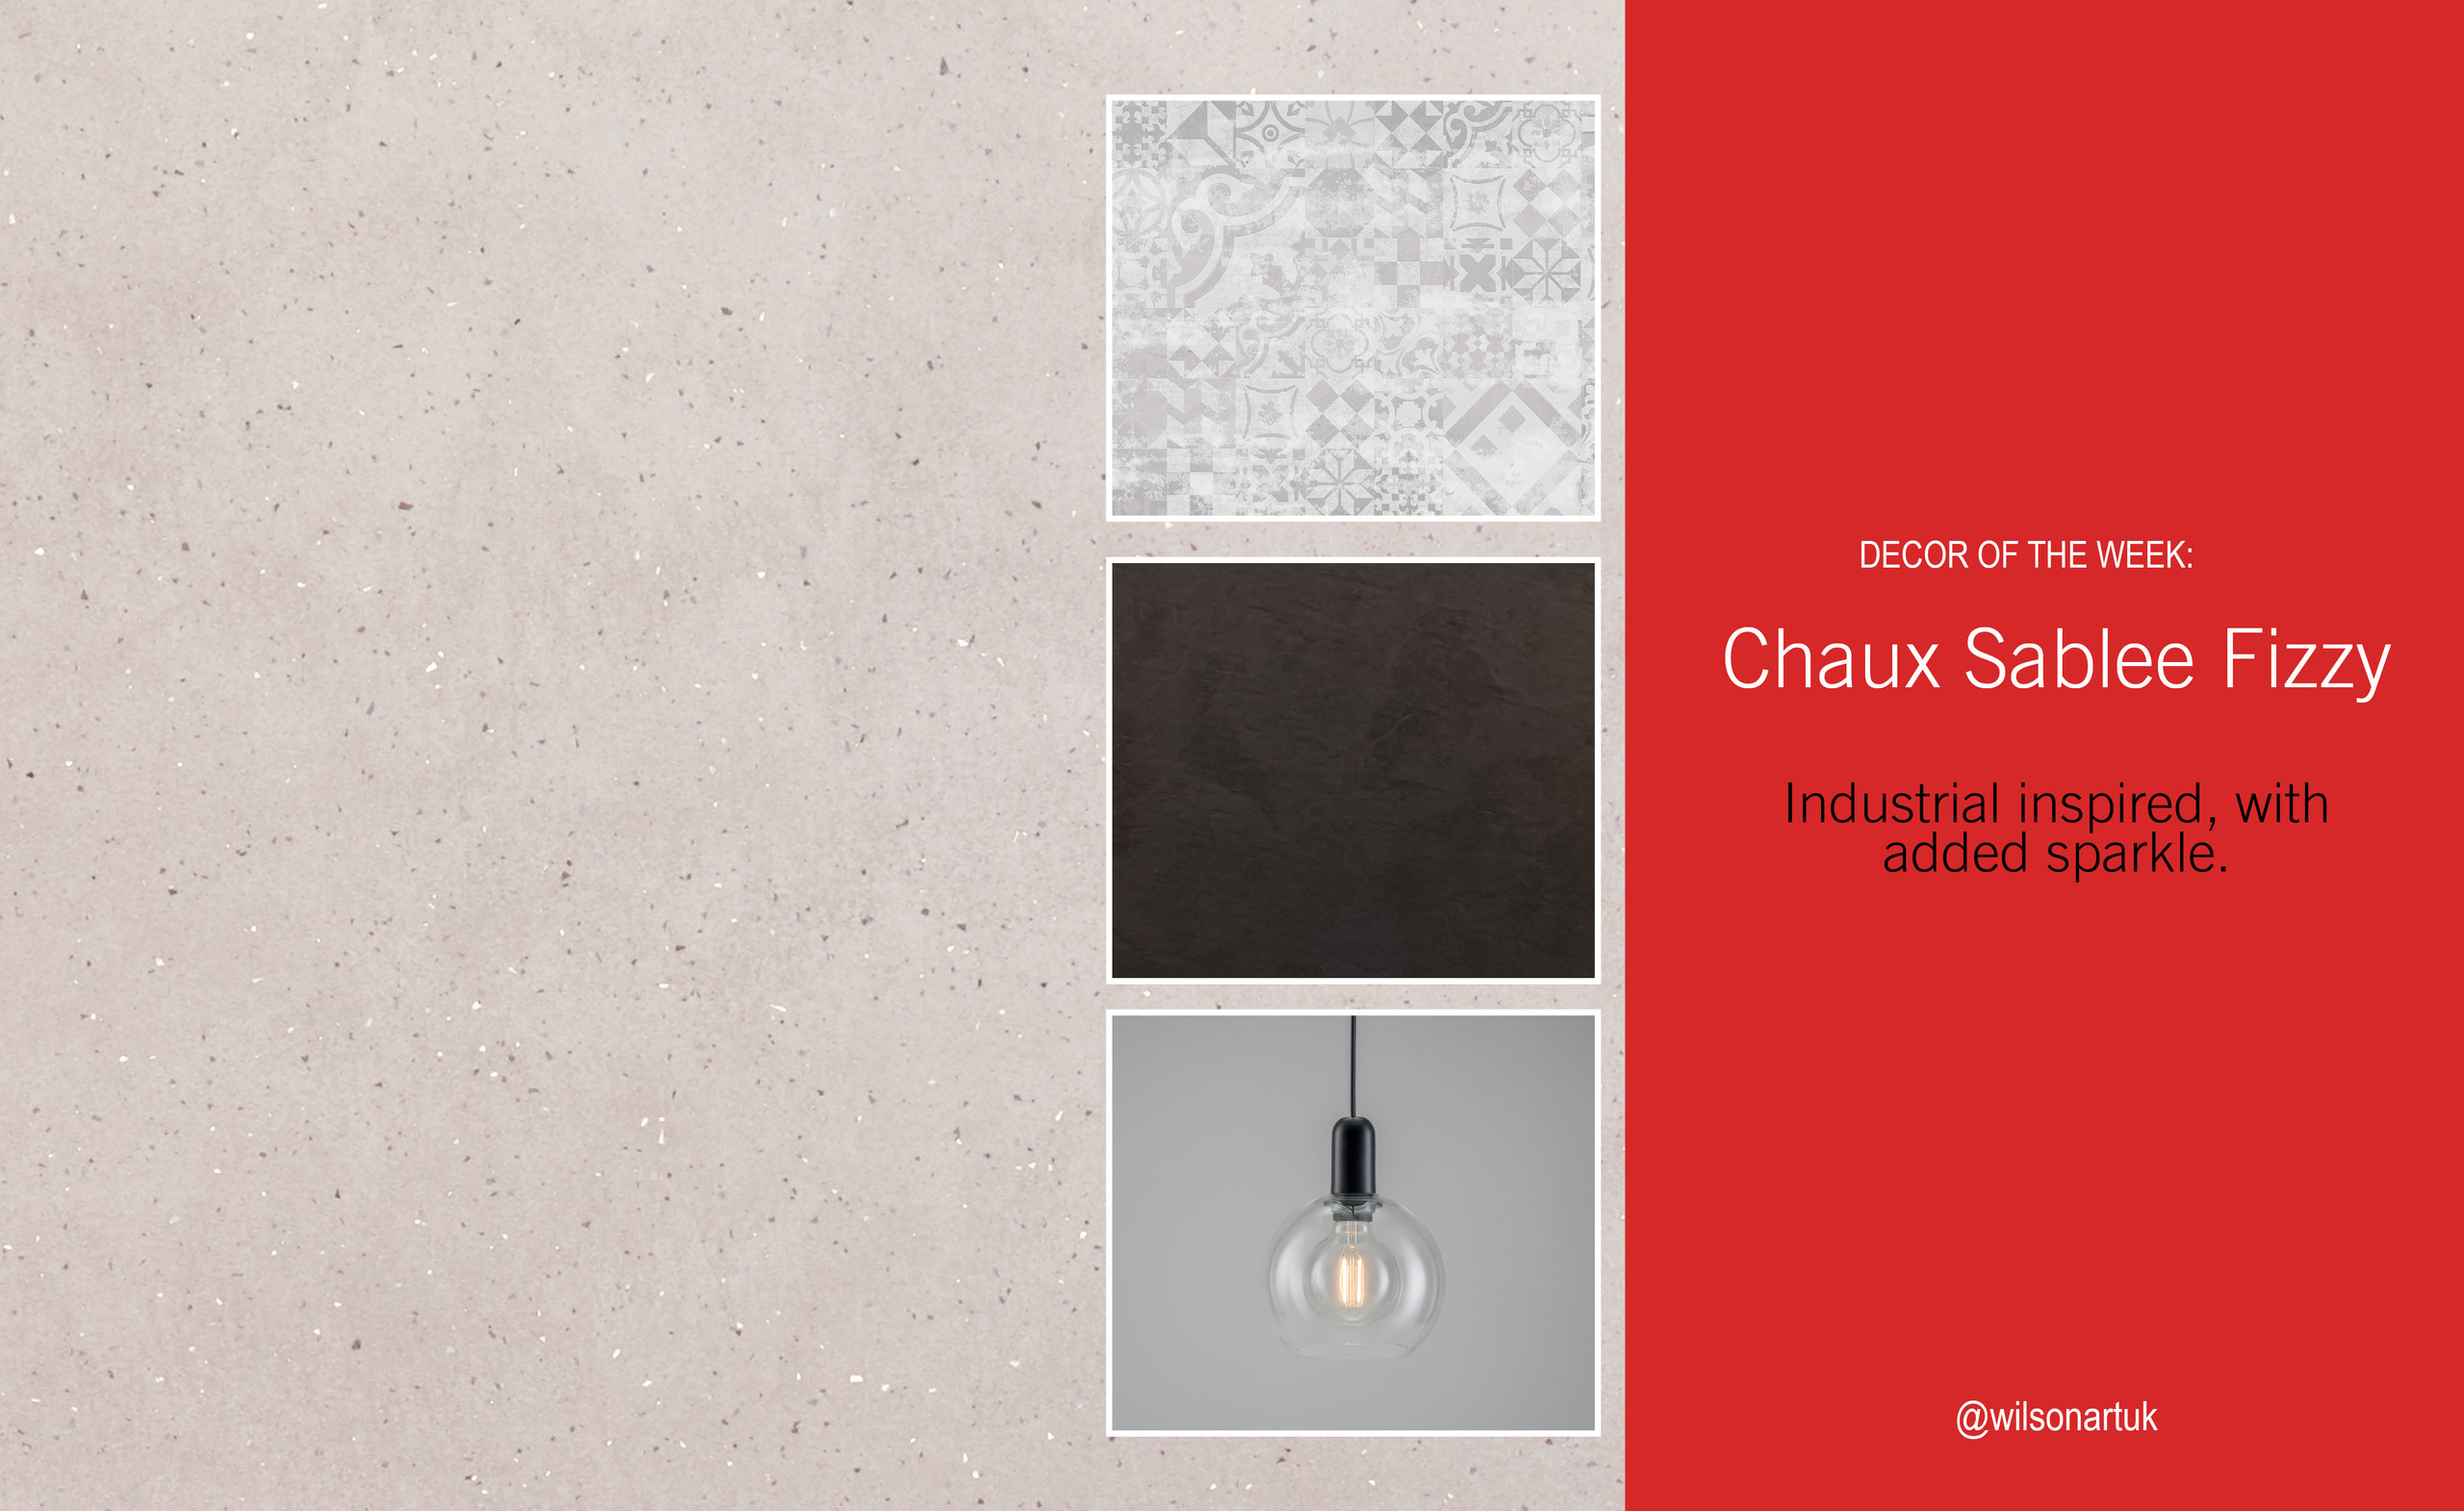 Decor of the Week: Chaux Sablee Fizzy